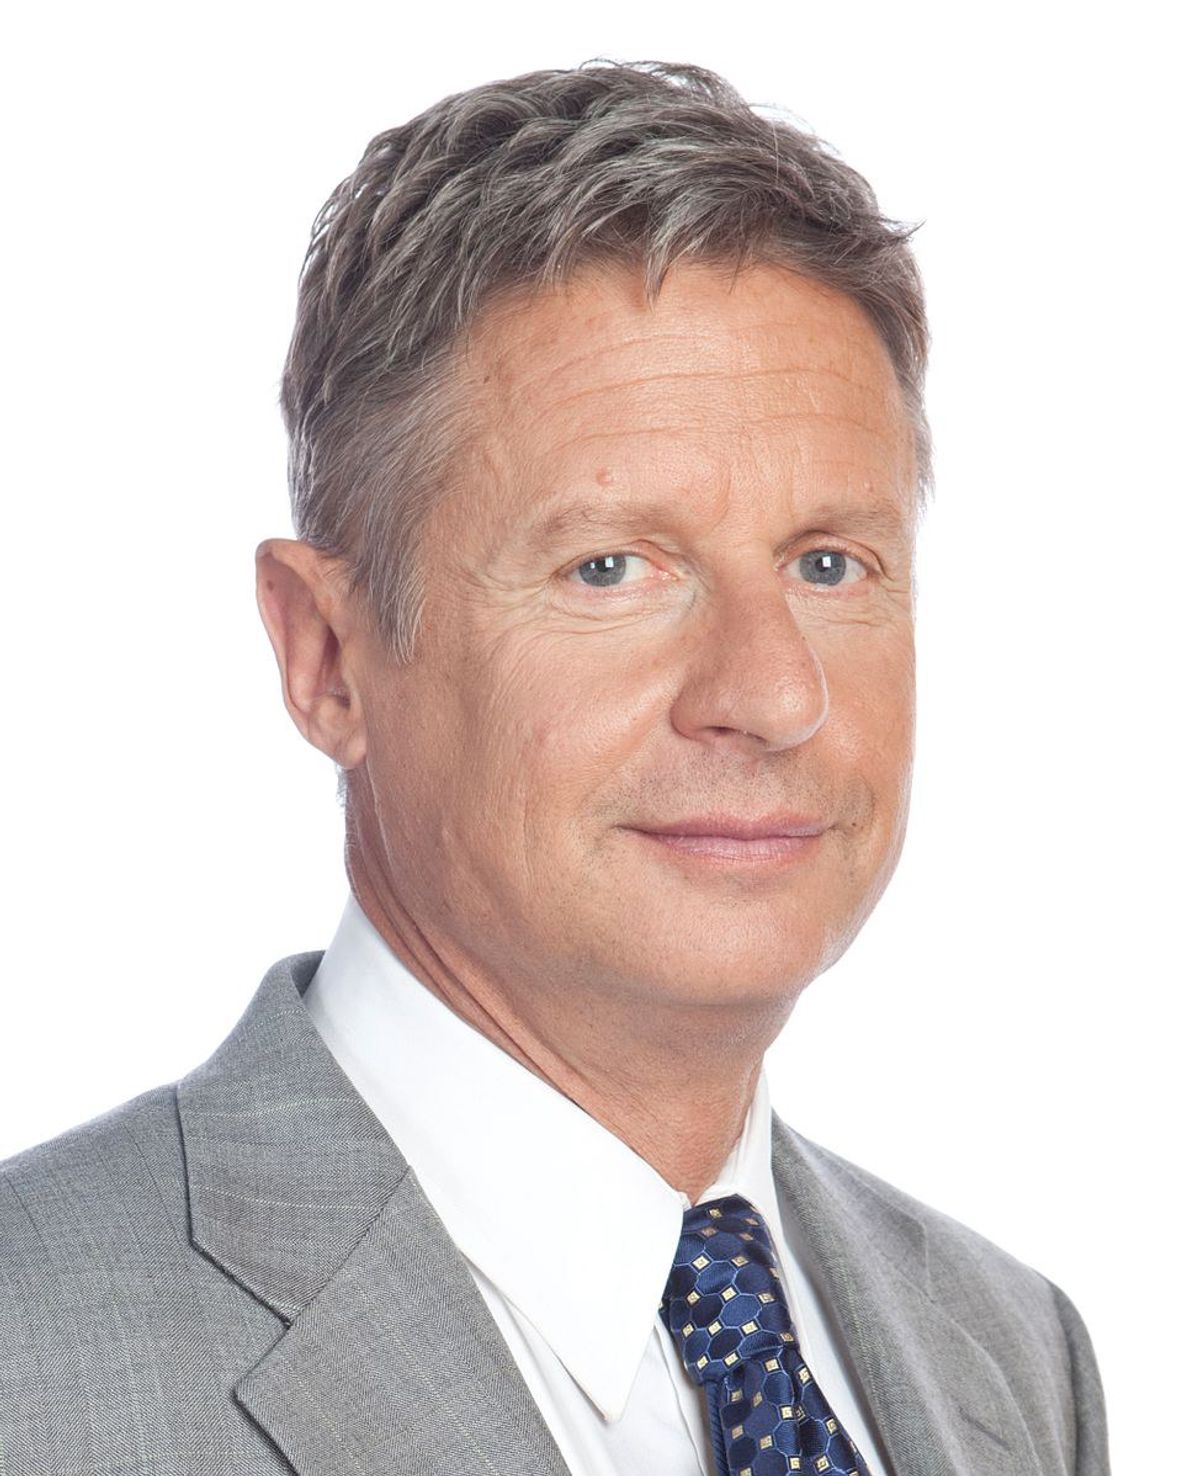 5 Reasons You Should Be Voting For Gary Johnson This November